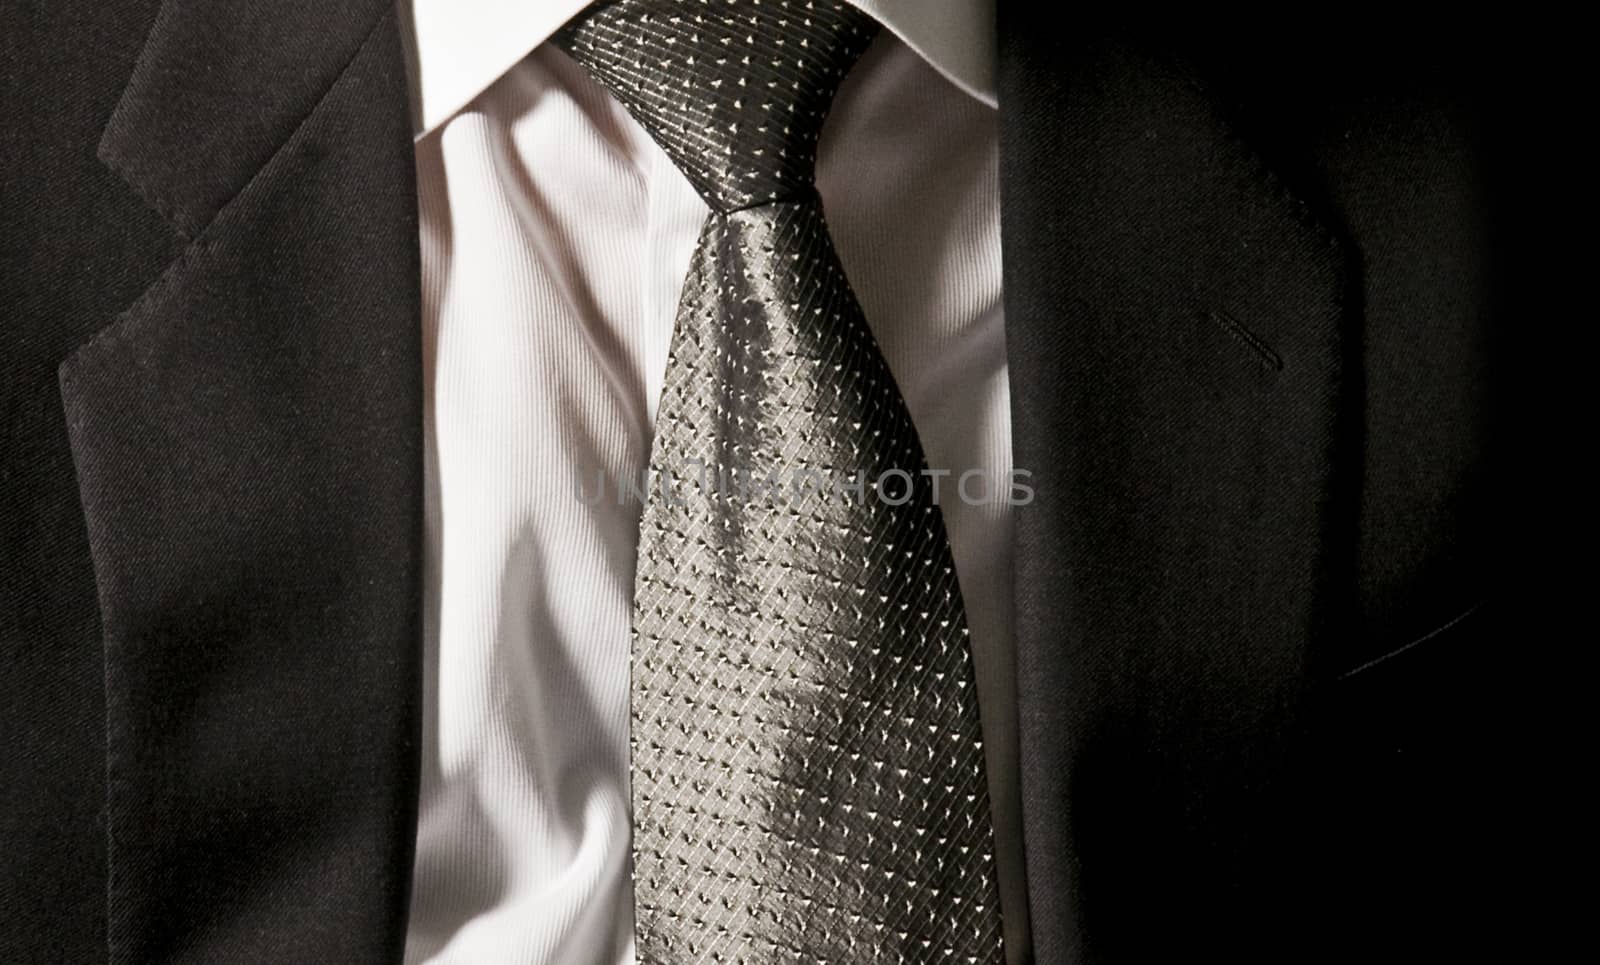 The boss's tie. The businessman is wearing his dark gray jacket on the white shirt with an elegant gray tie